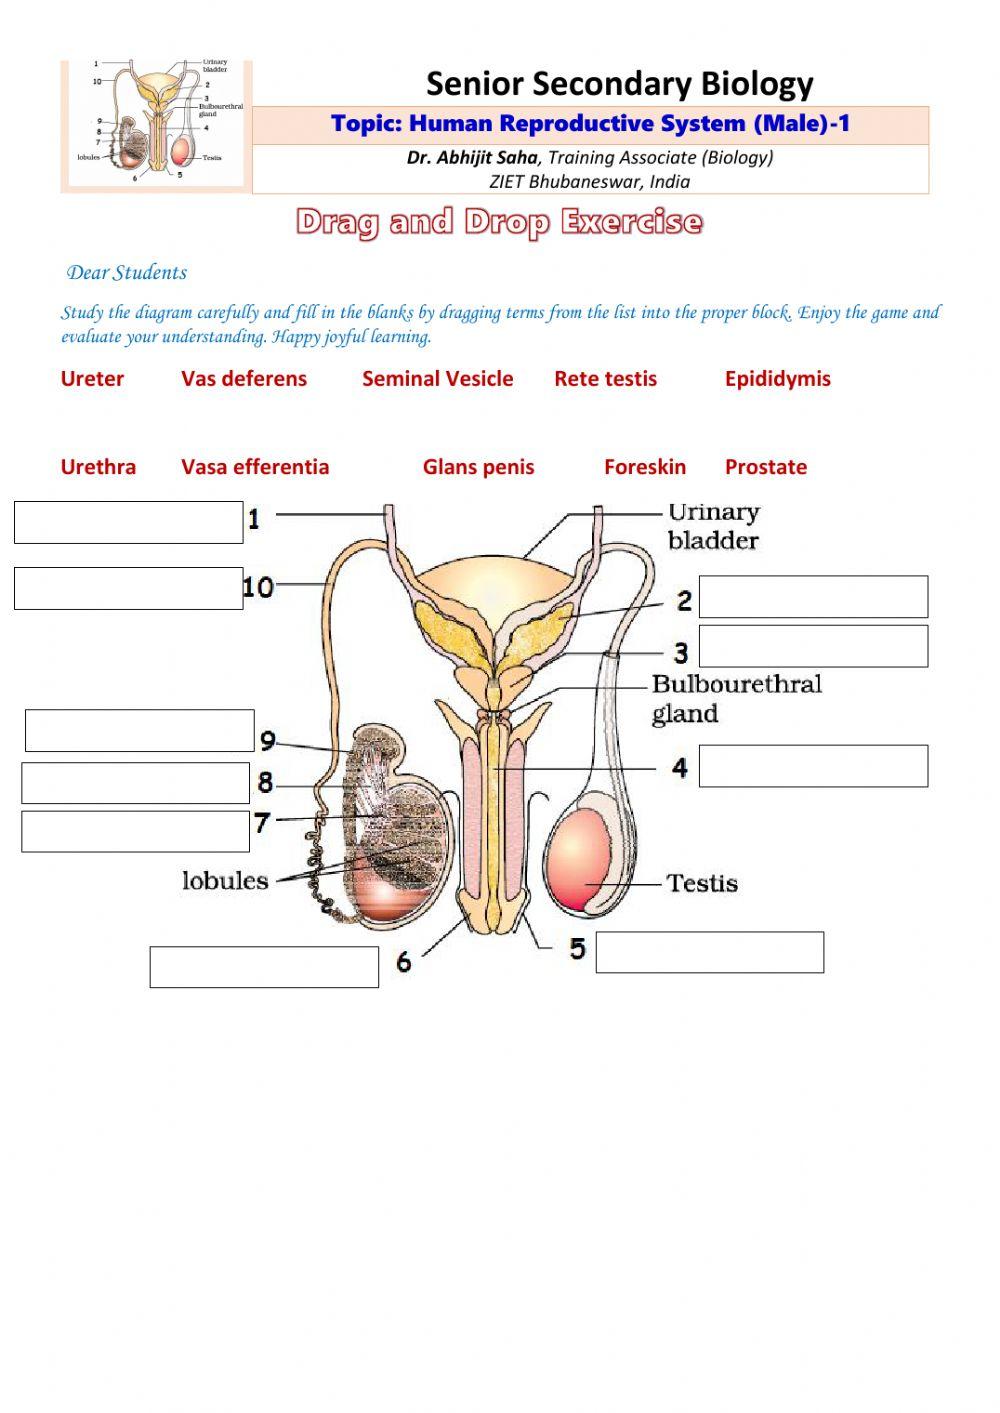 Senior Secondary Biology- Human male Reproductive System-1